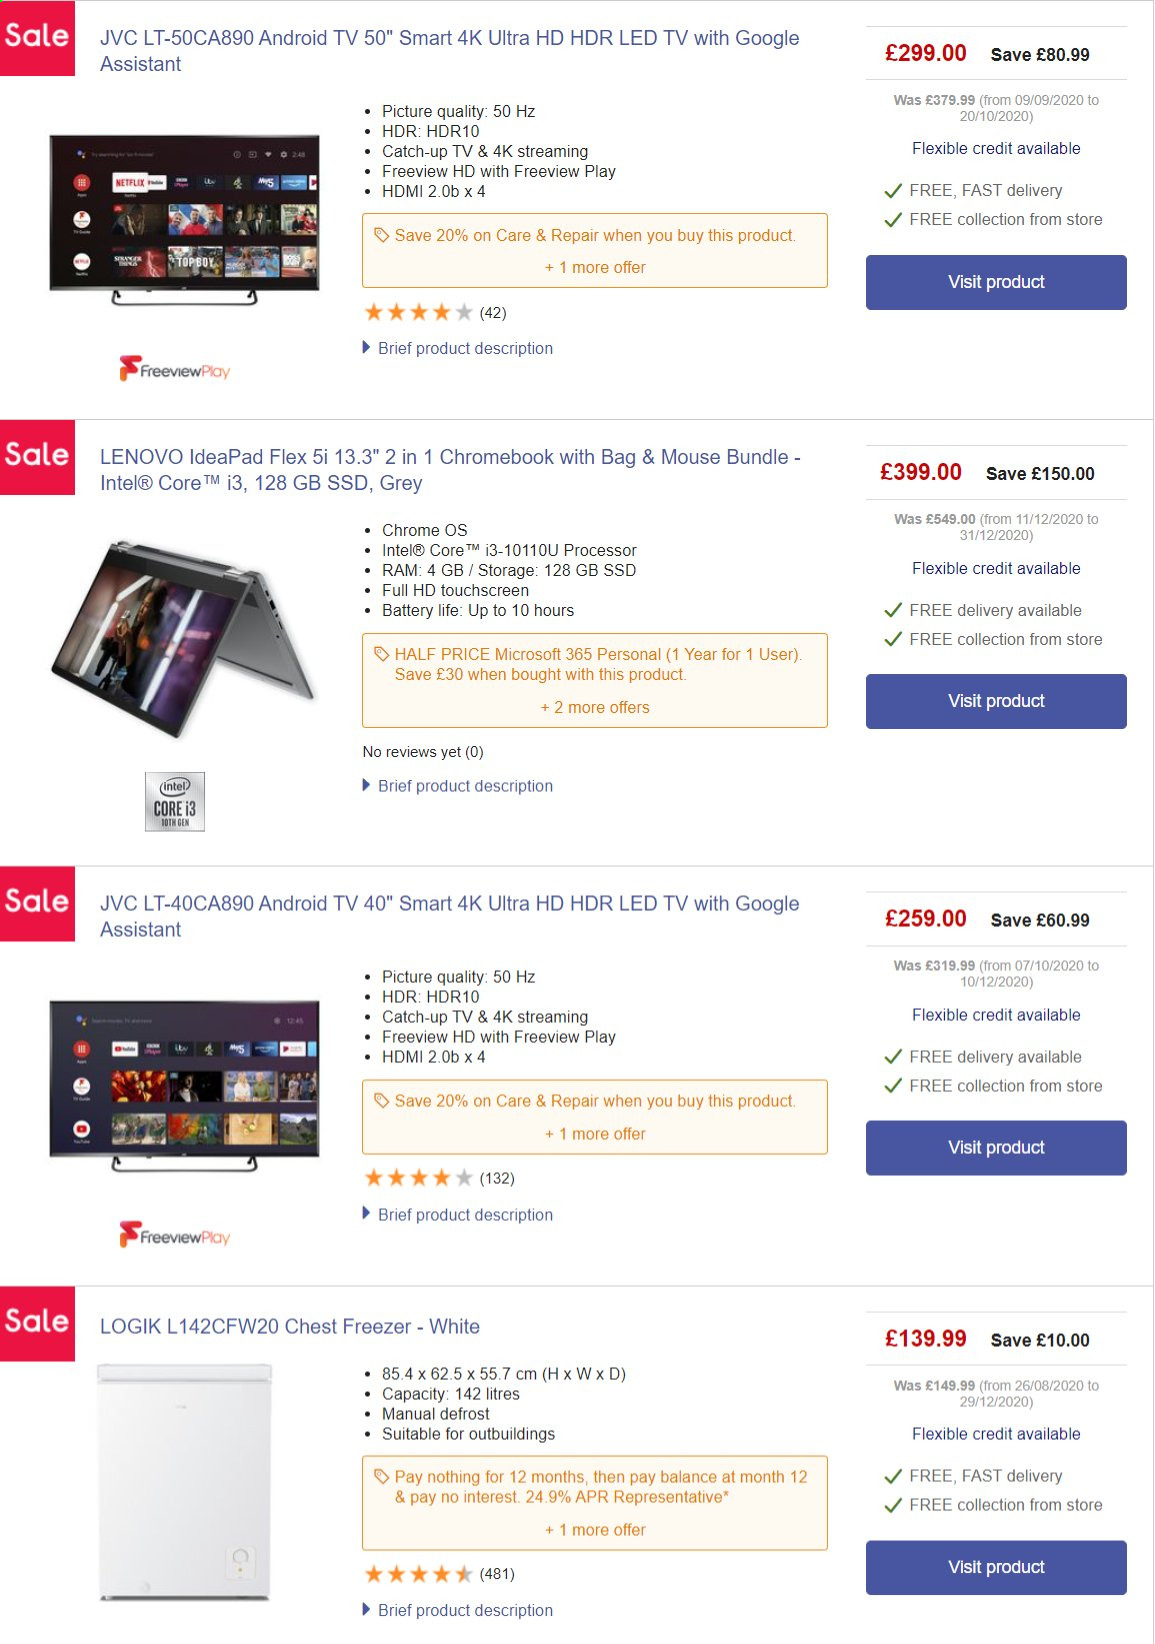 thumbnail - Currys PC World offer  - Sales products - Lenovo, chromebook, Intel, mouse, JVC, Android TV, LED TV, UHD TV, ultra hd, TV, freezer, chest freezer. Page 3.